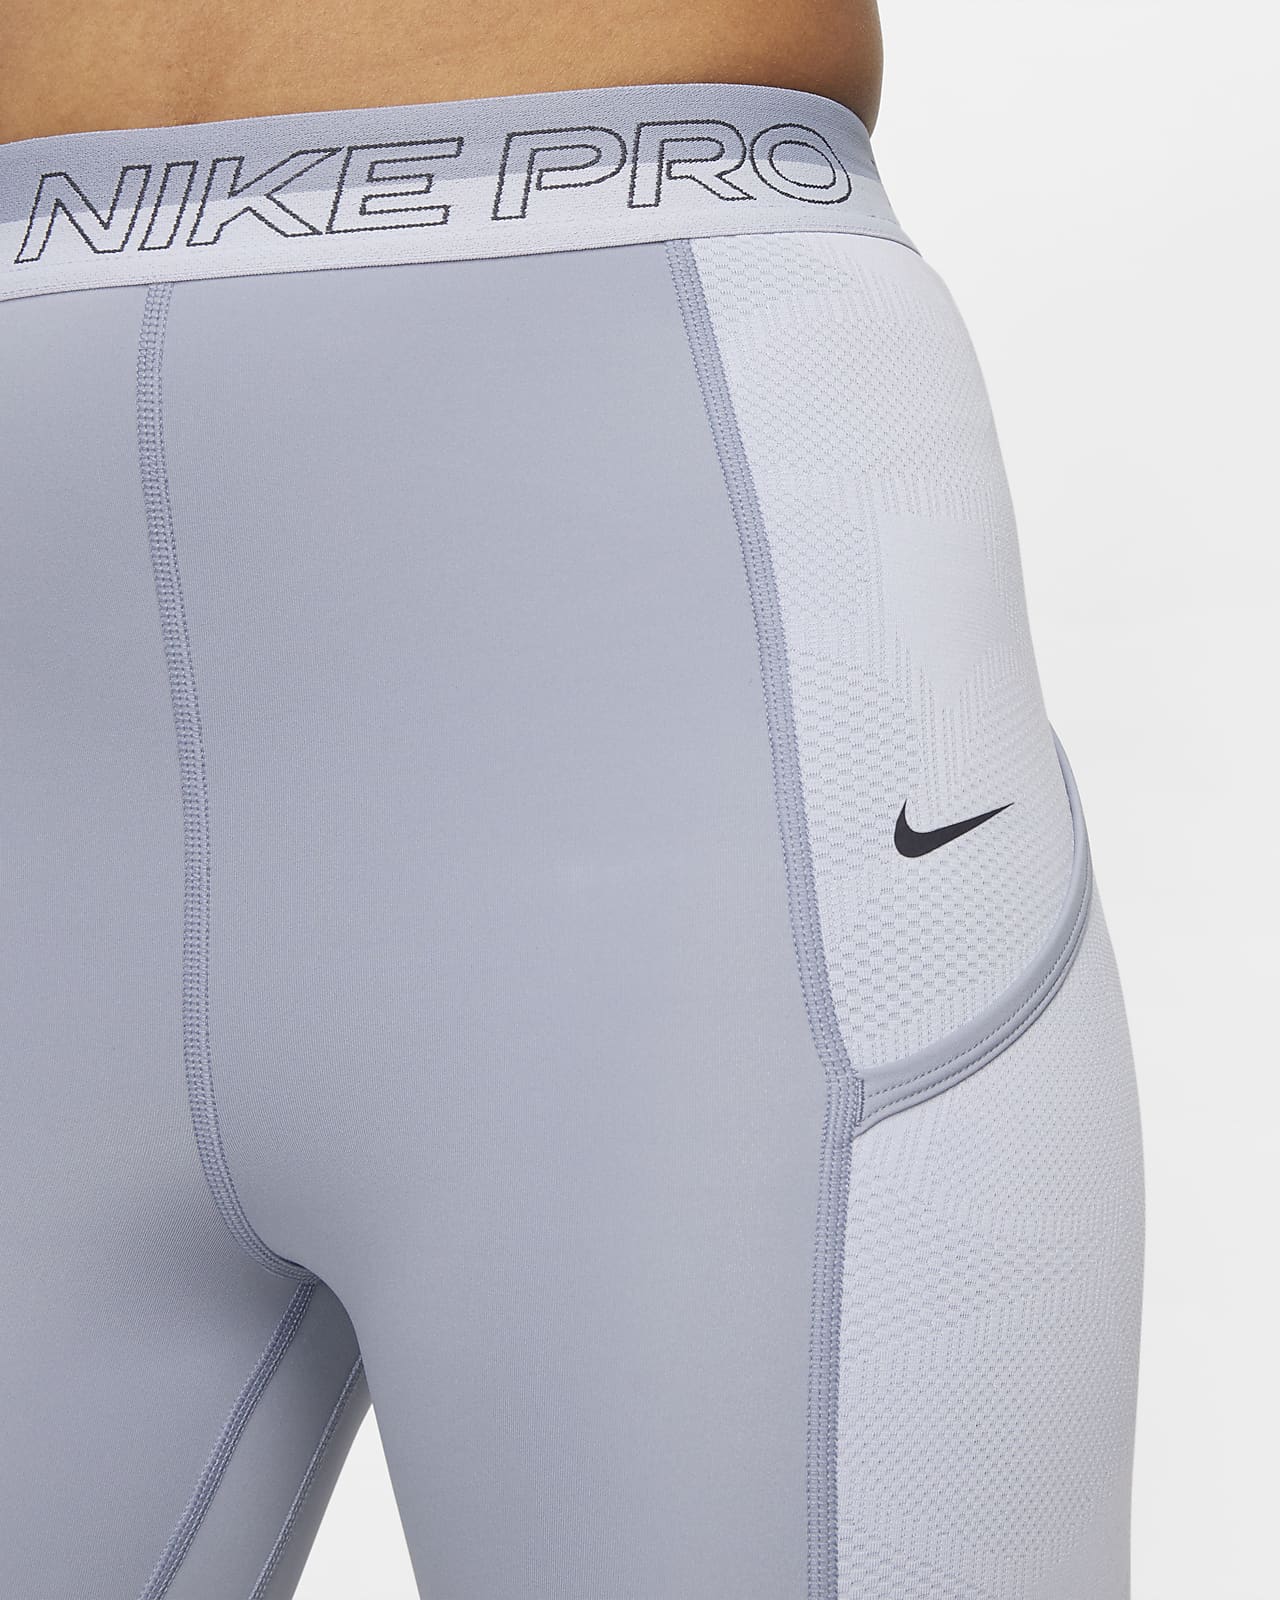 Nike Pro Women's High-Waisted 7/8 Training Leggings with Pockets.